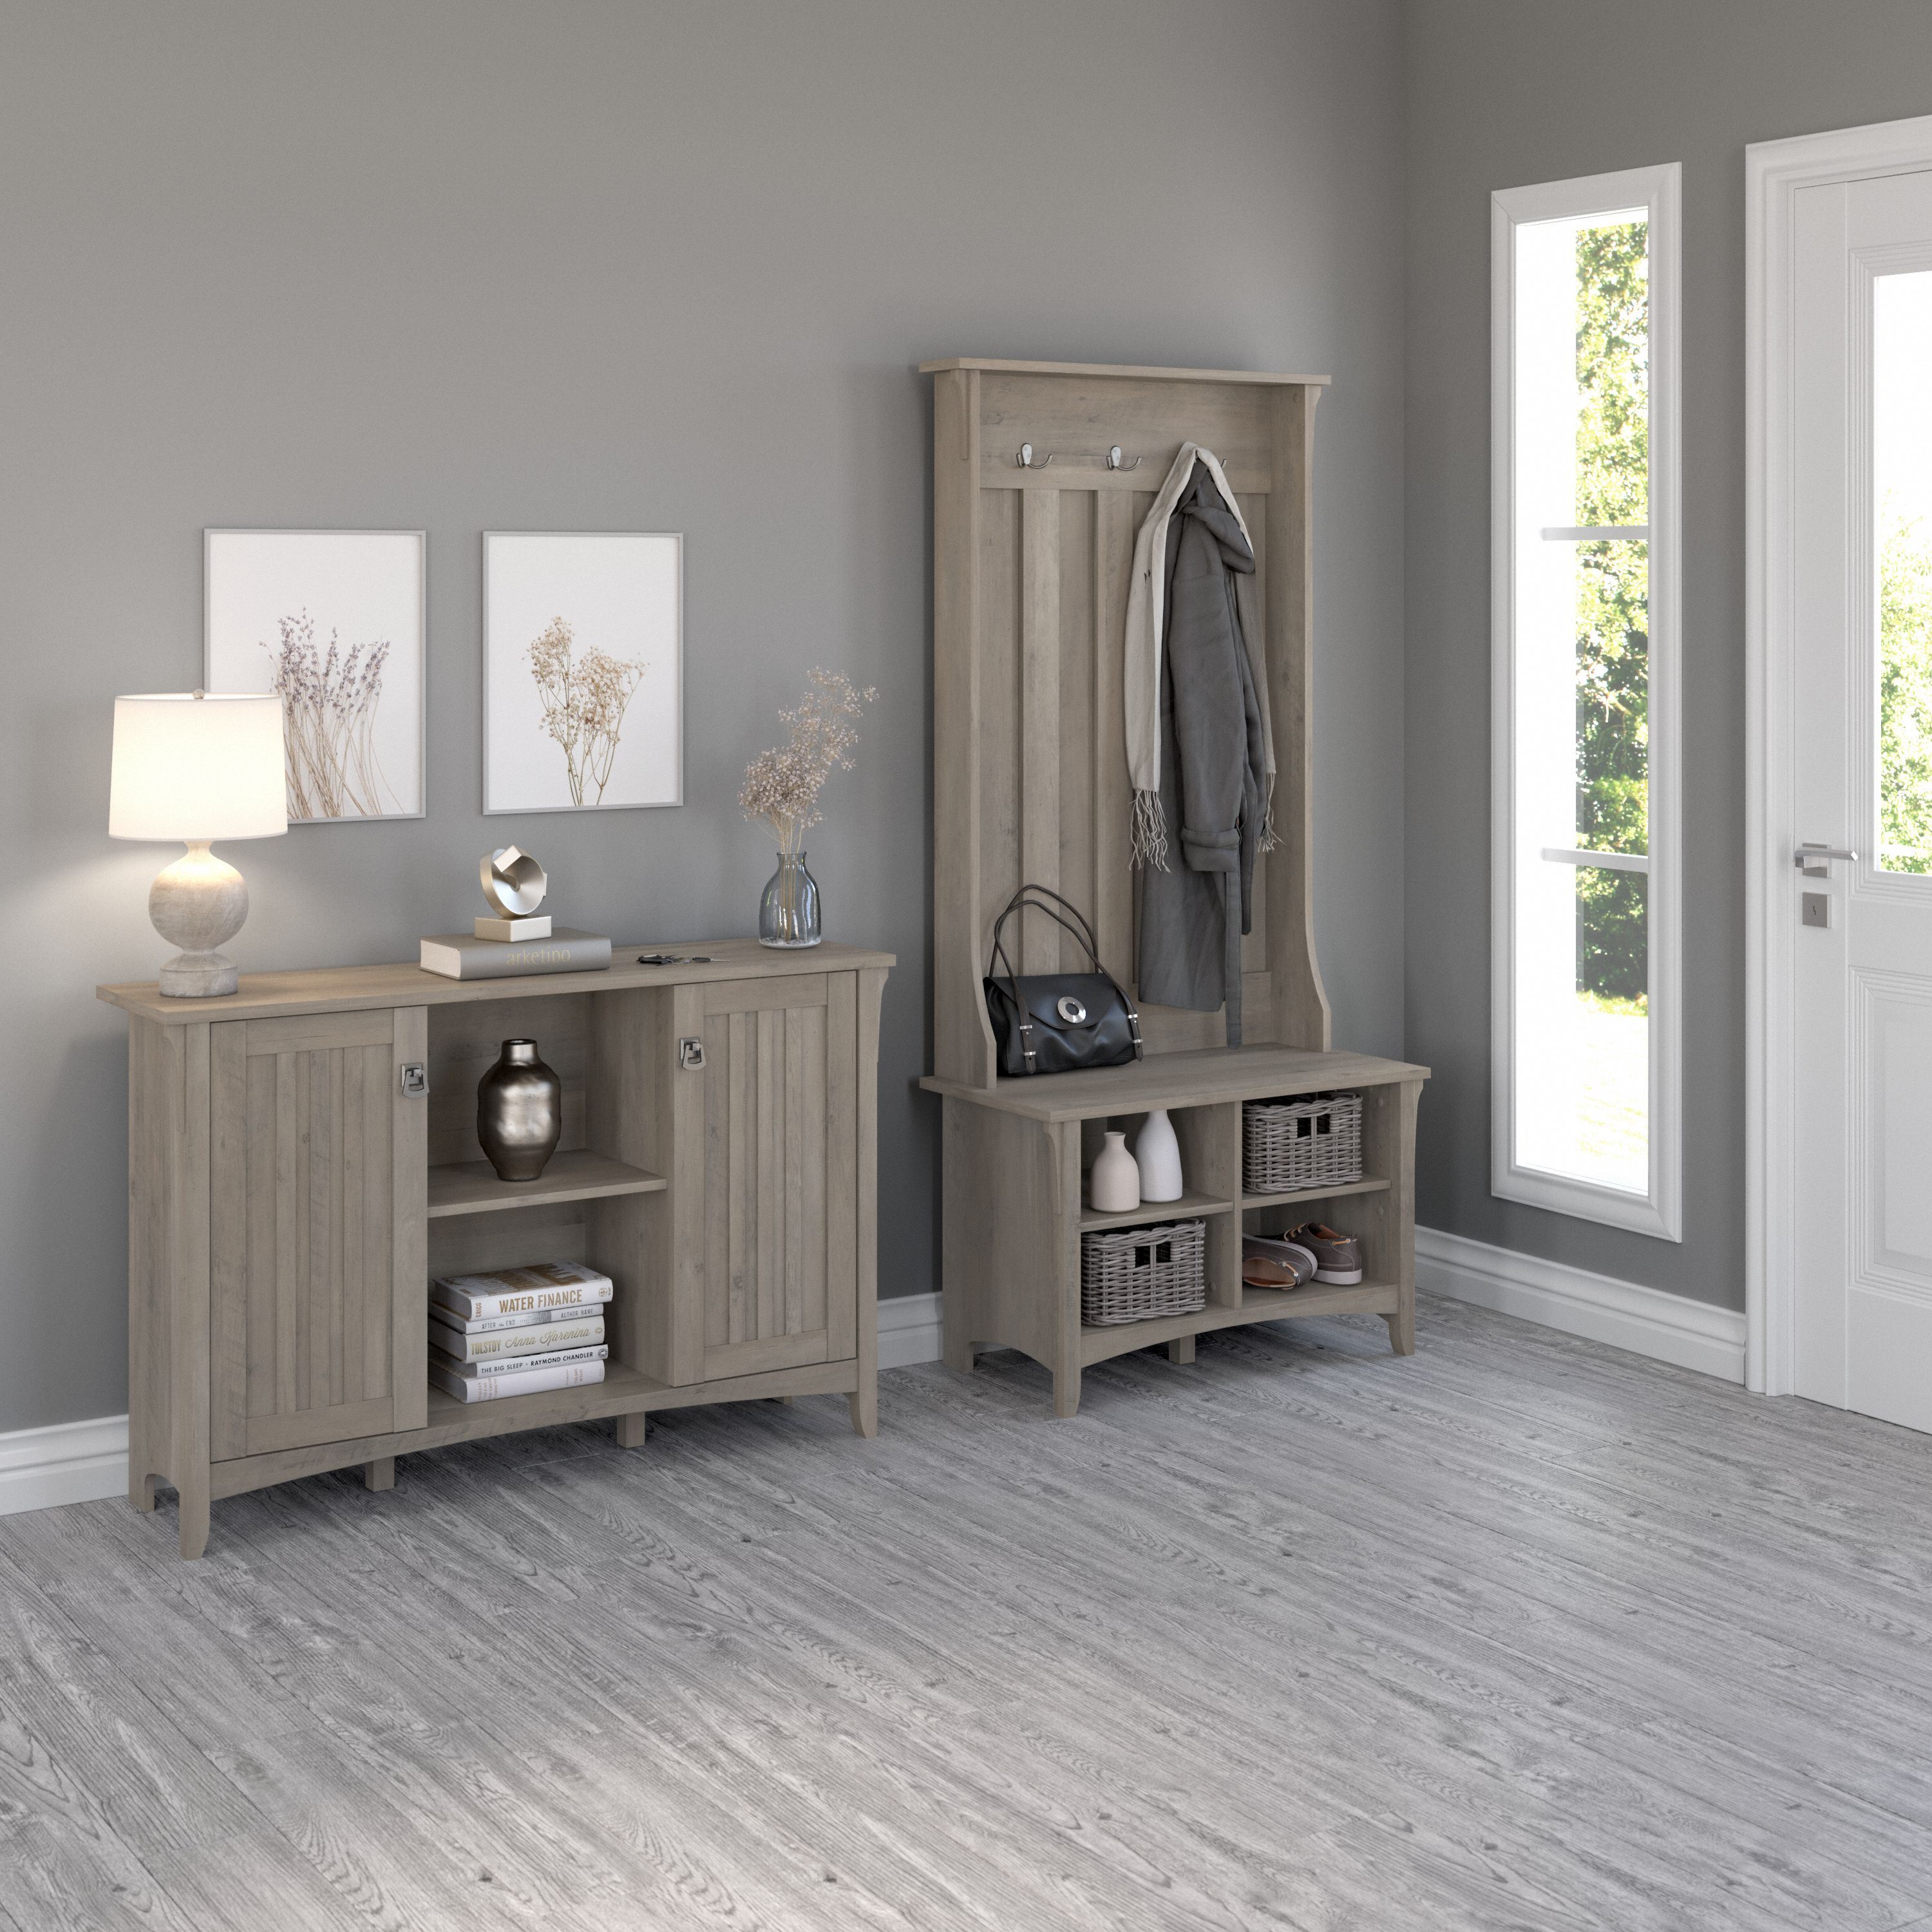 Shop Bush Furniture Salinas Entryway Storage Set with Hall Tree, Shoe Bench and Accent Cabinet 01 SAL008DG #color_driftwood gray